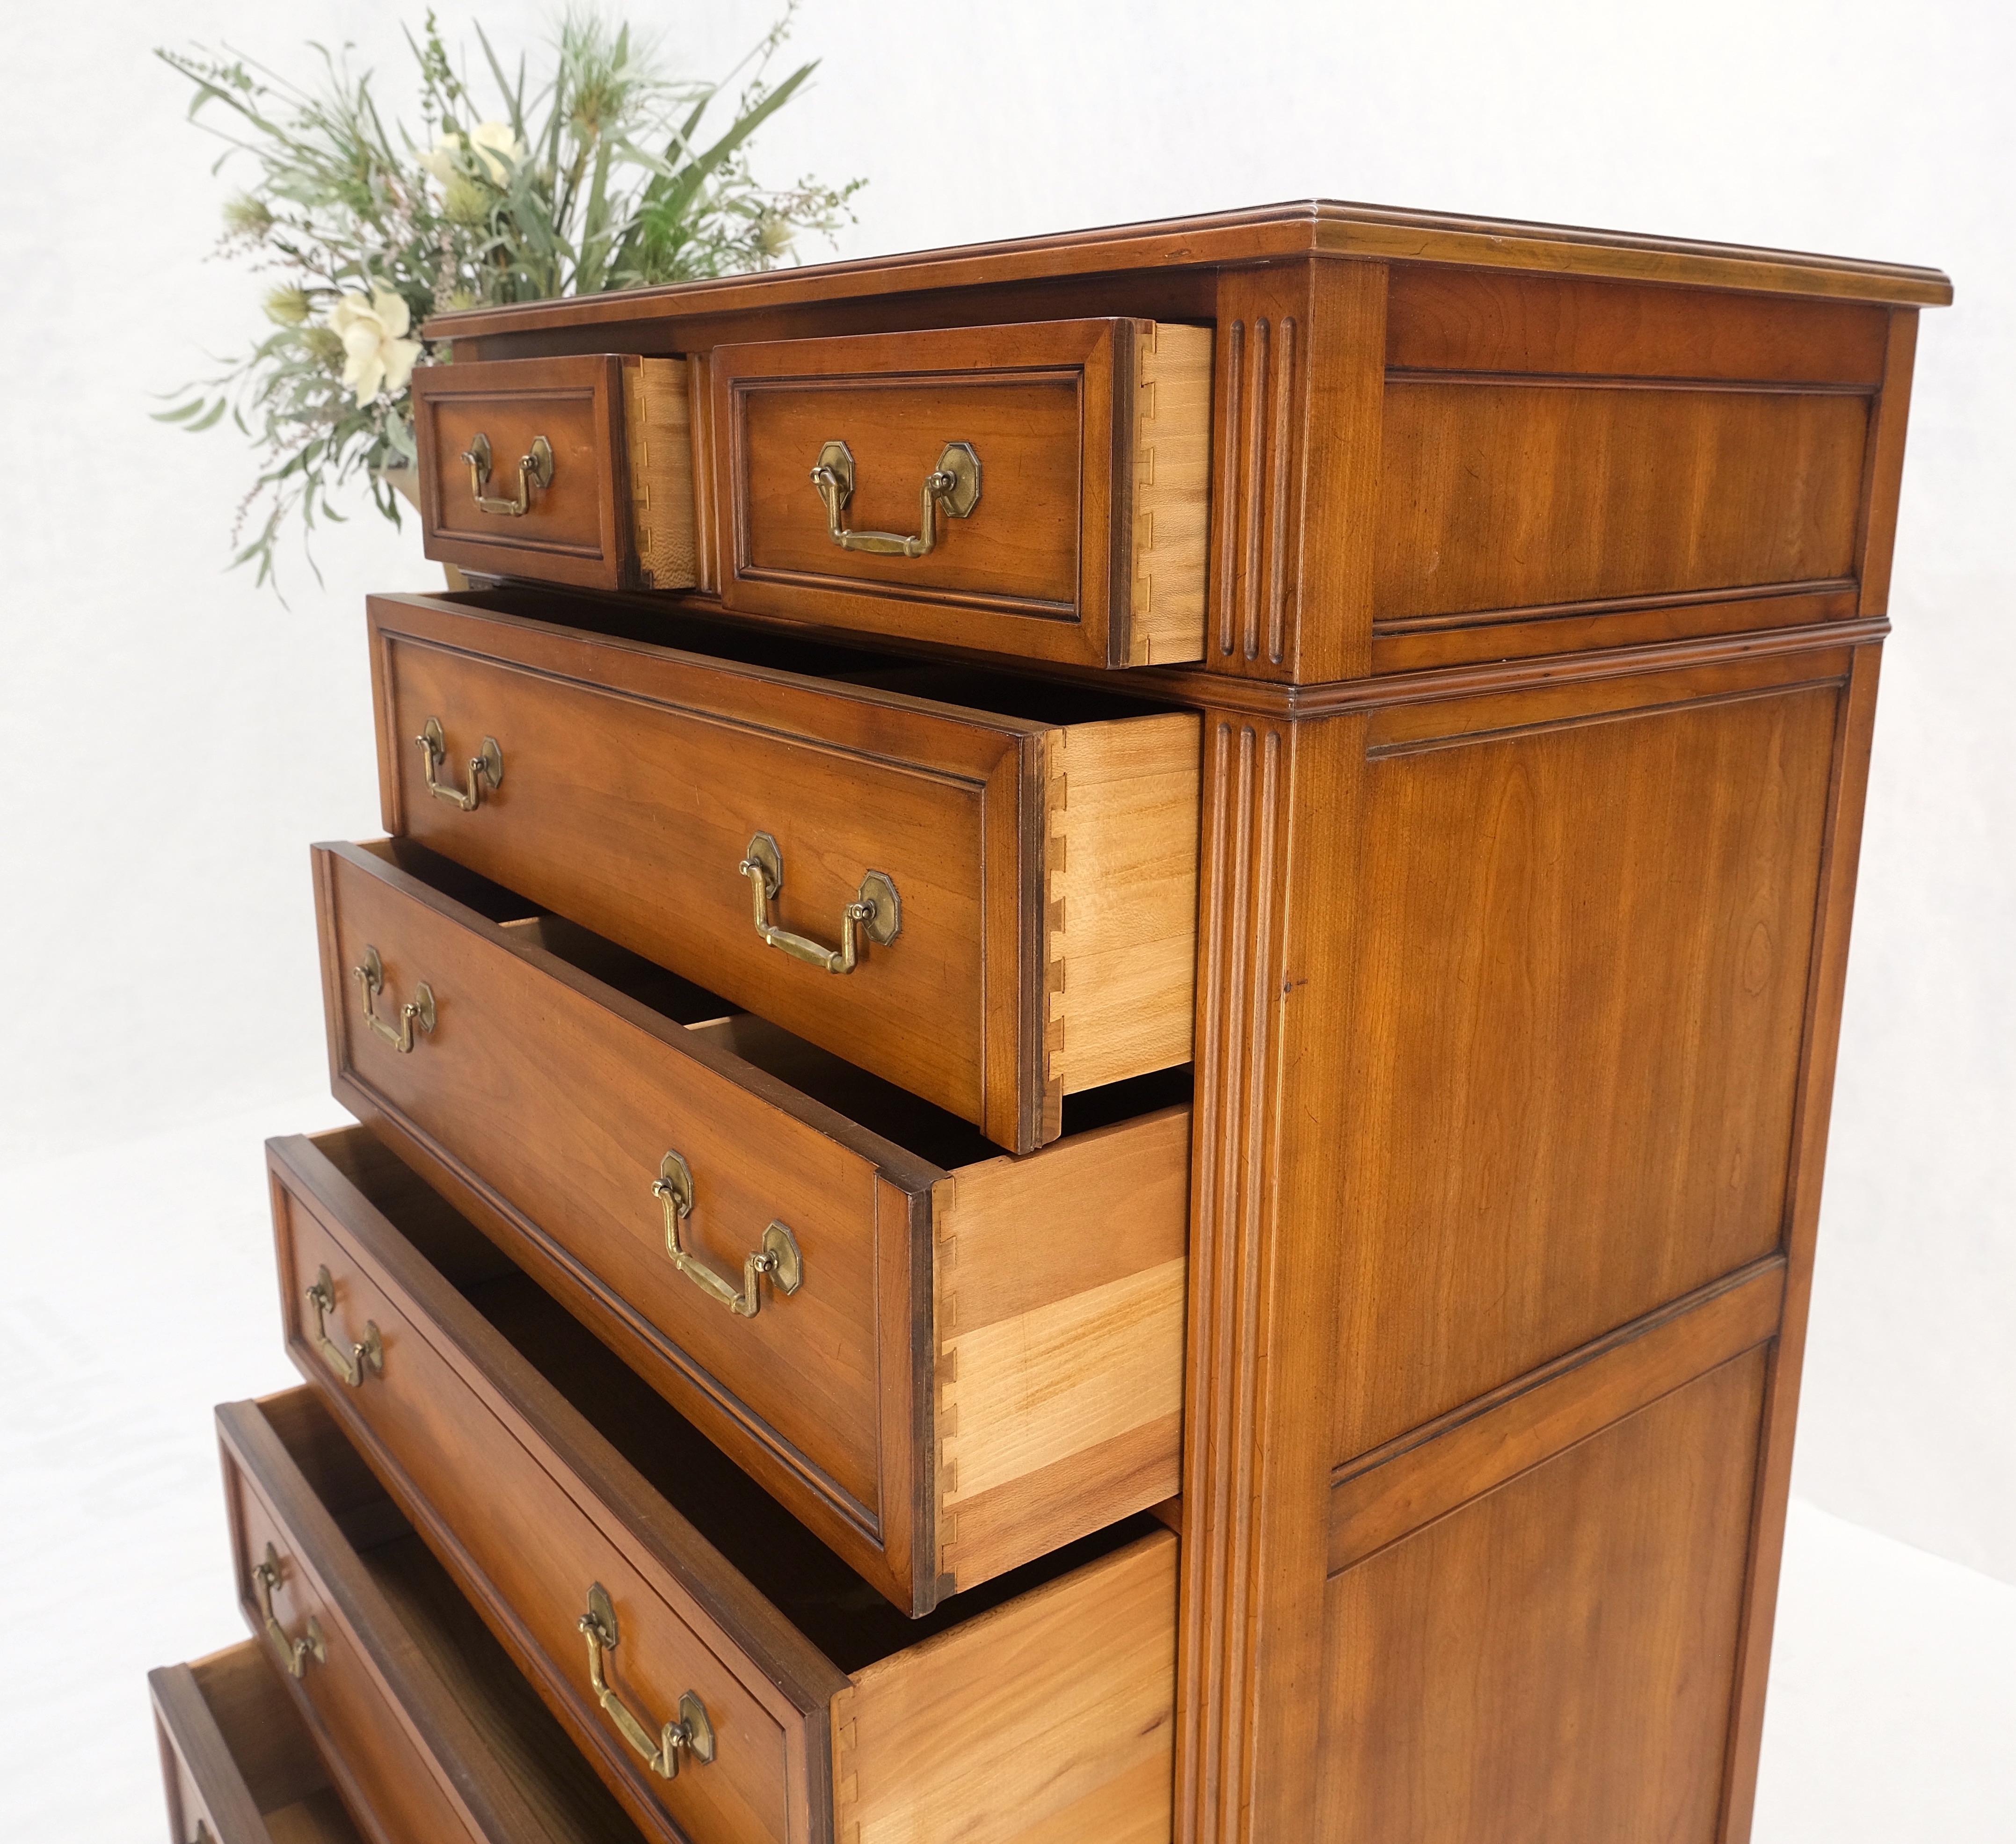 American Kindel 7 Drawers Fruitwood Heavy Brass Drop Pulls High Chest Tall Dresser Mint! For Sale